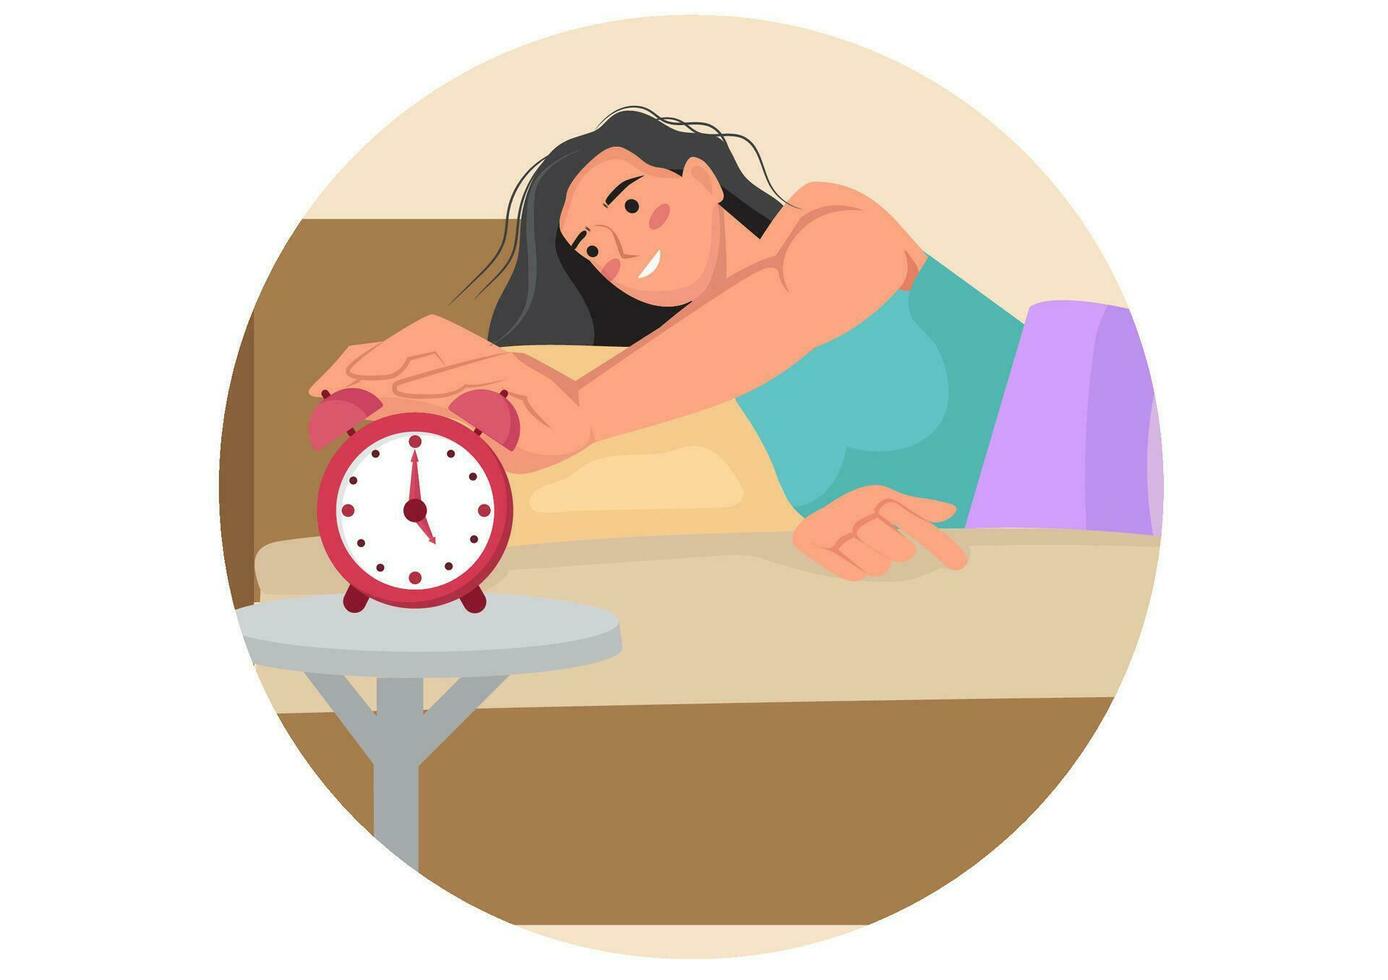 Sleepy girl can wake up early. Turn off the alarm clock to go to work. Vector illustration